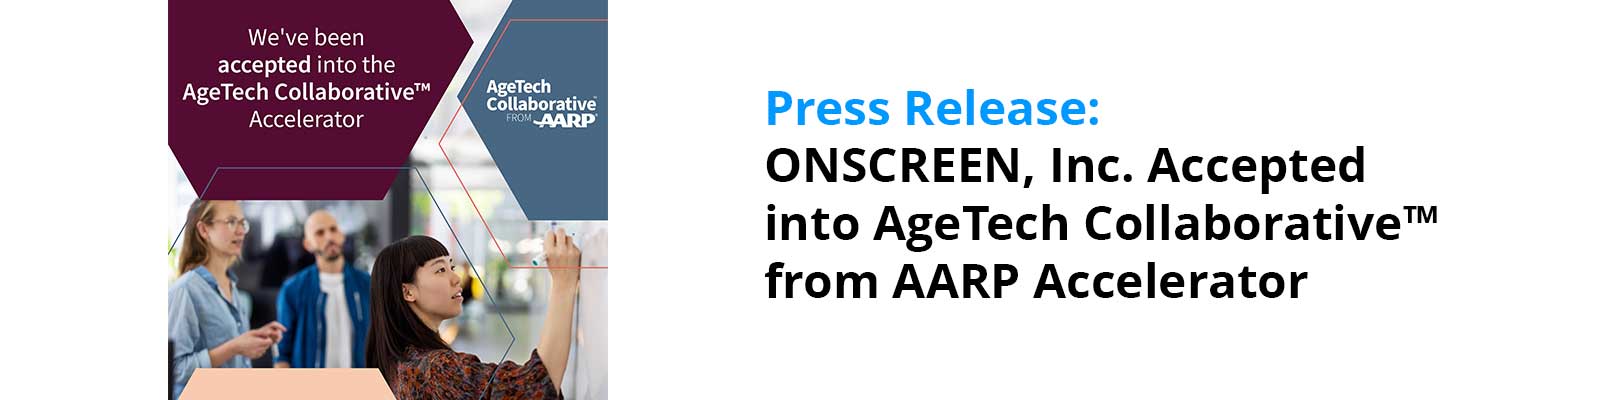 ONSCREEN, Inc. Accepted into AgeTech Collaborative™ from AARP Accelerator